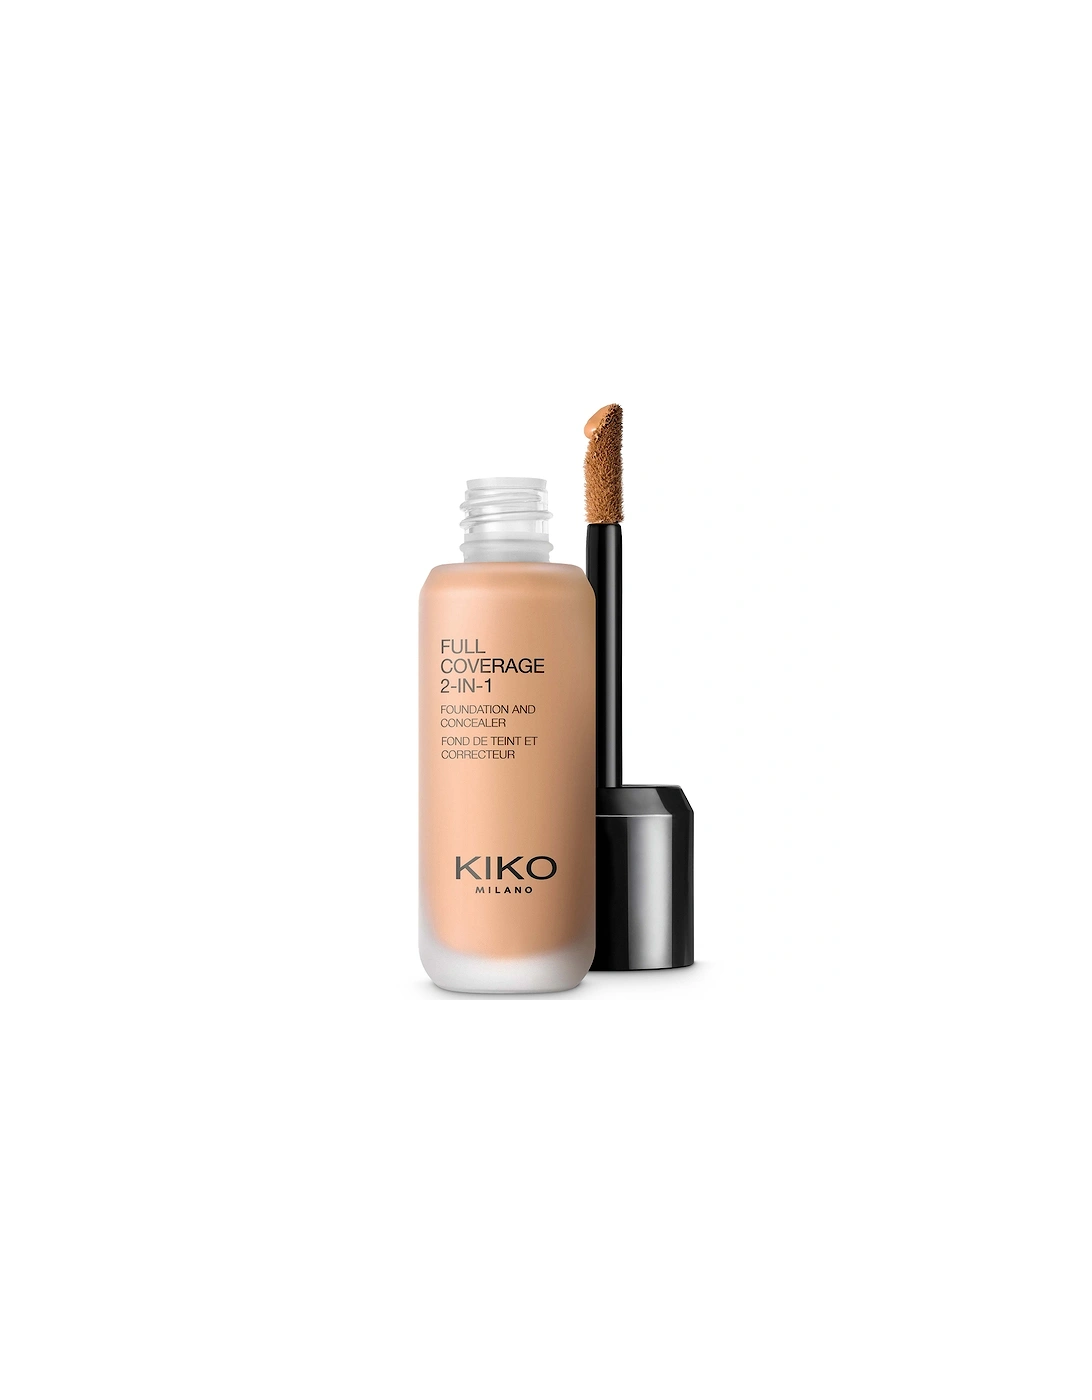 Full Coverage 2-in-1 Foundation and Concealer 25ml - 95 Neutral, 2 of 1